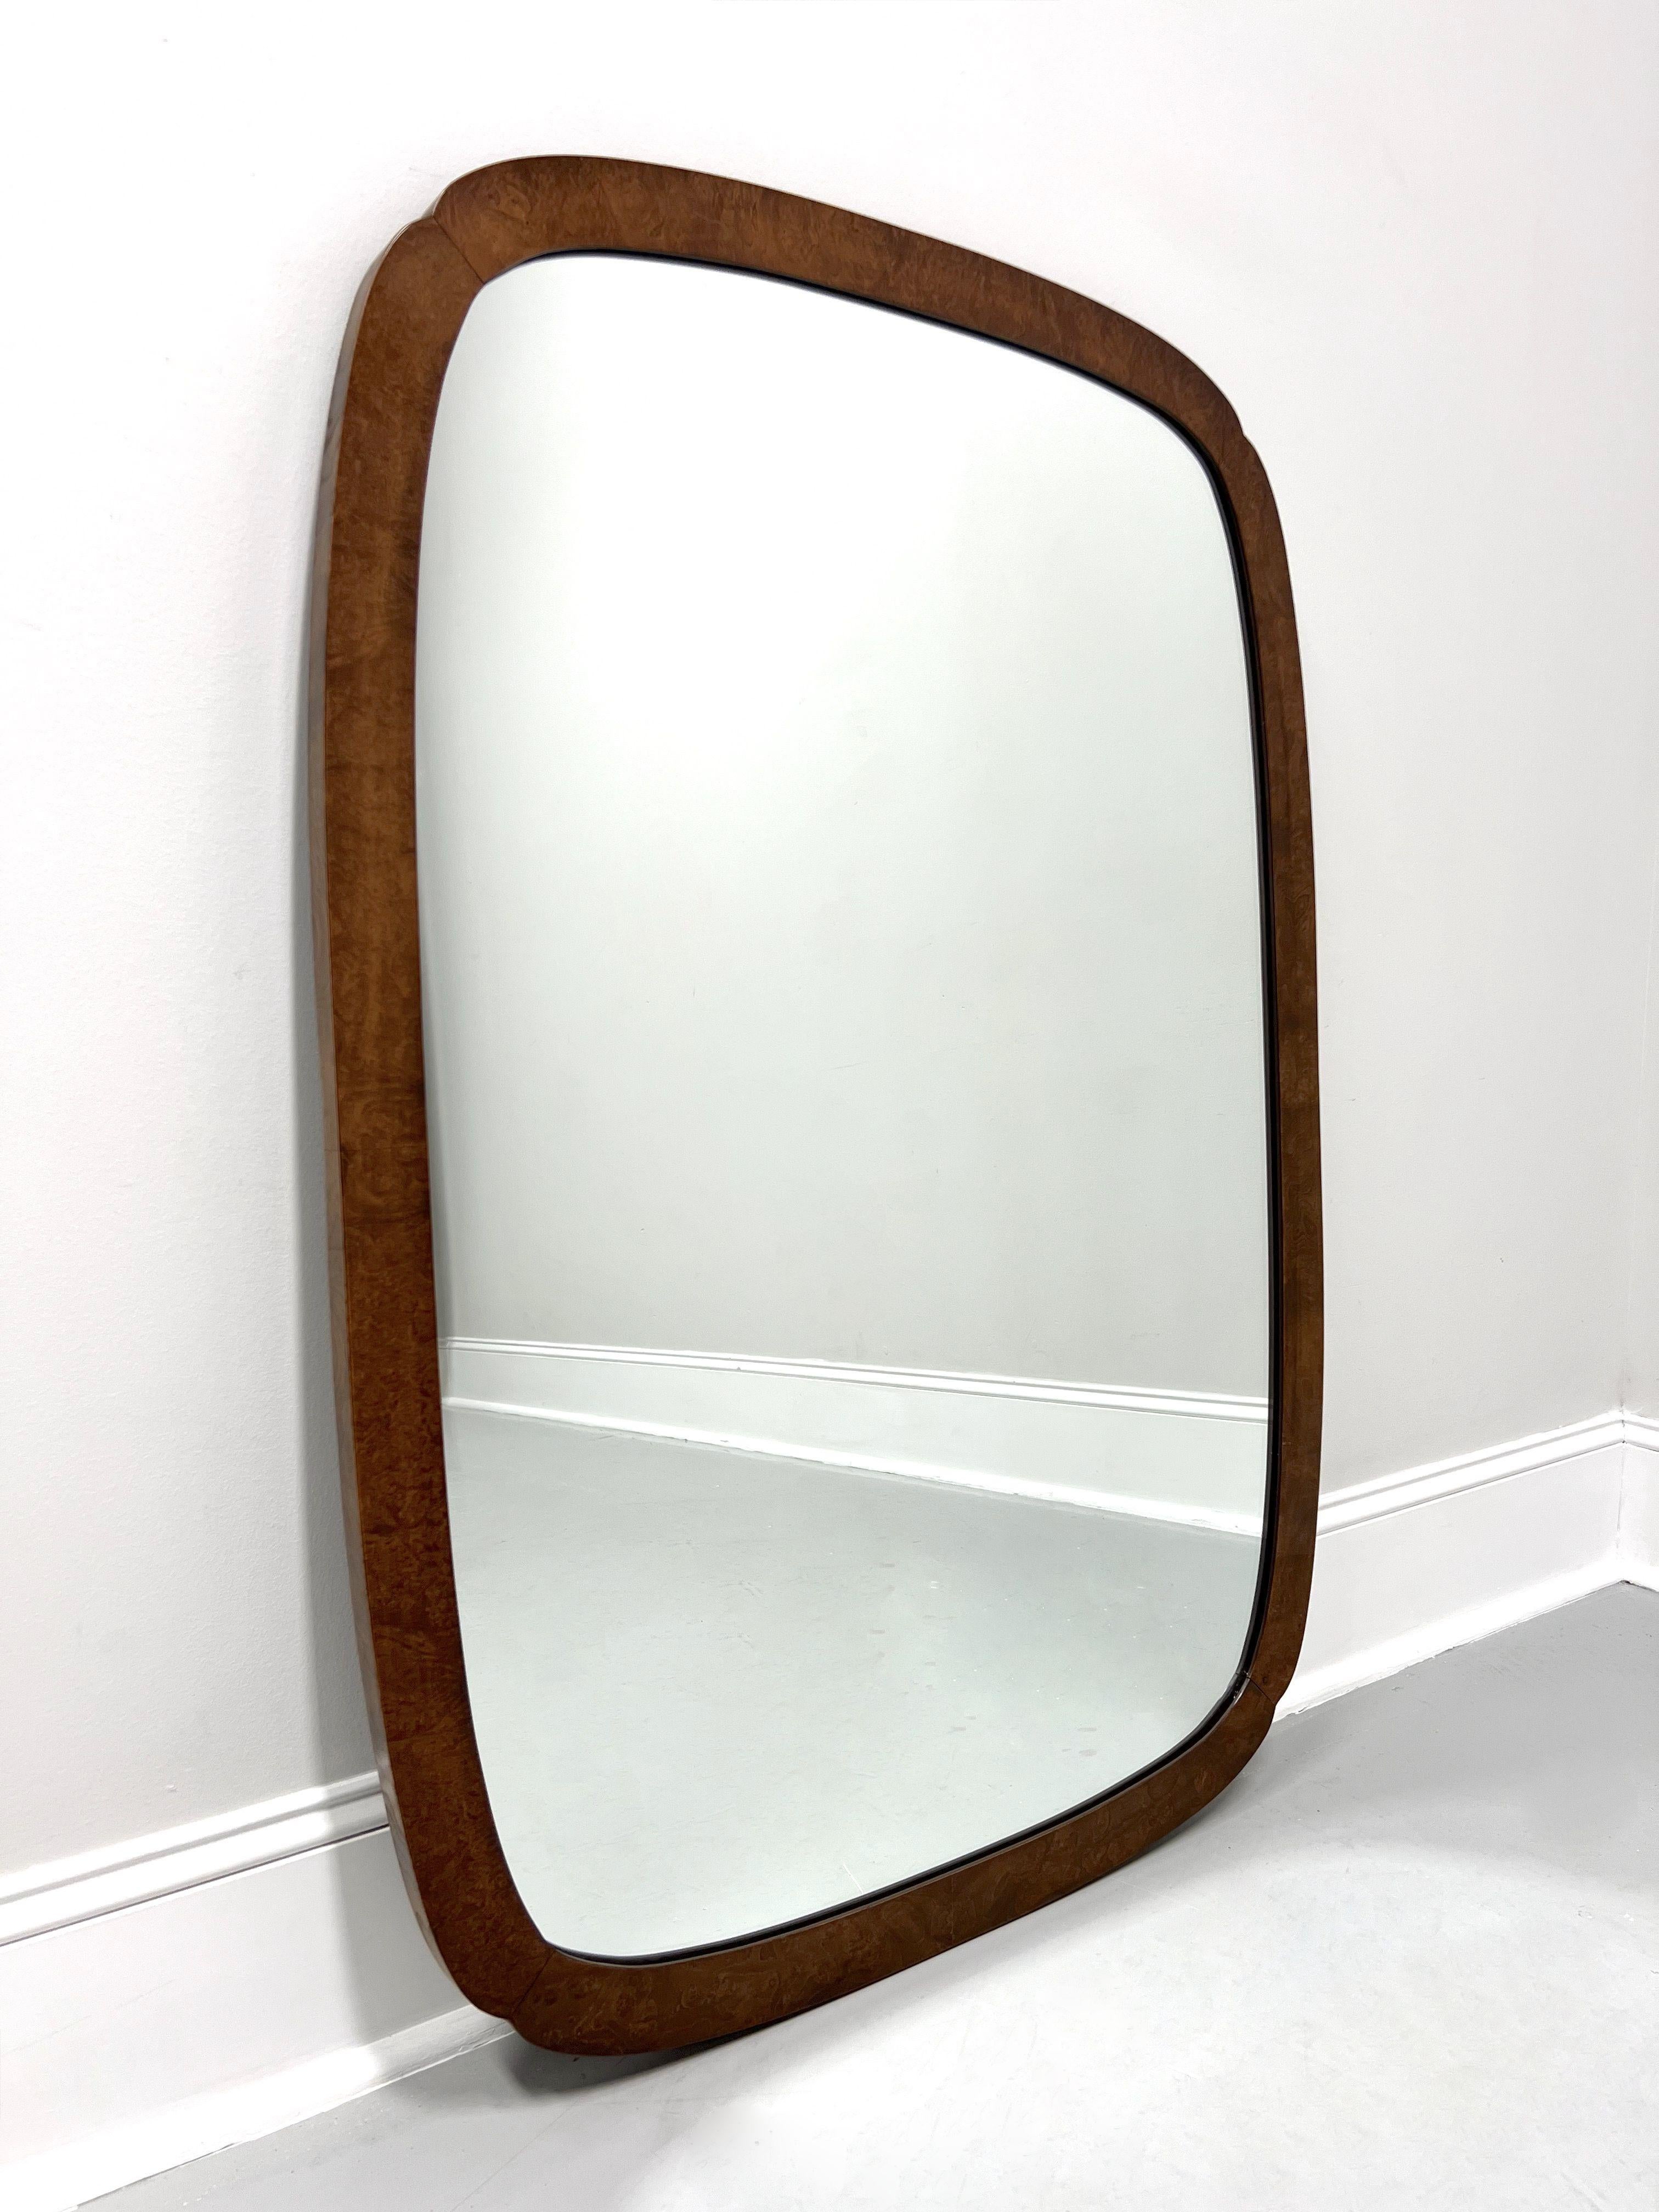 BAKER Burl Walnut Asian Inspired Wall Mirror with Clipped Corners 3